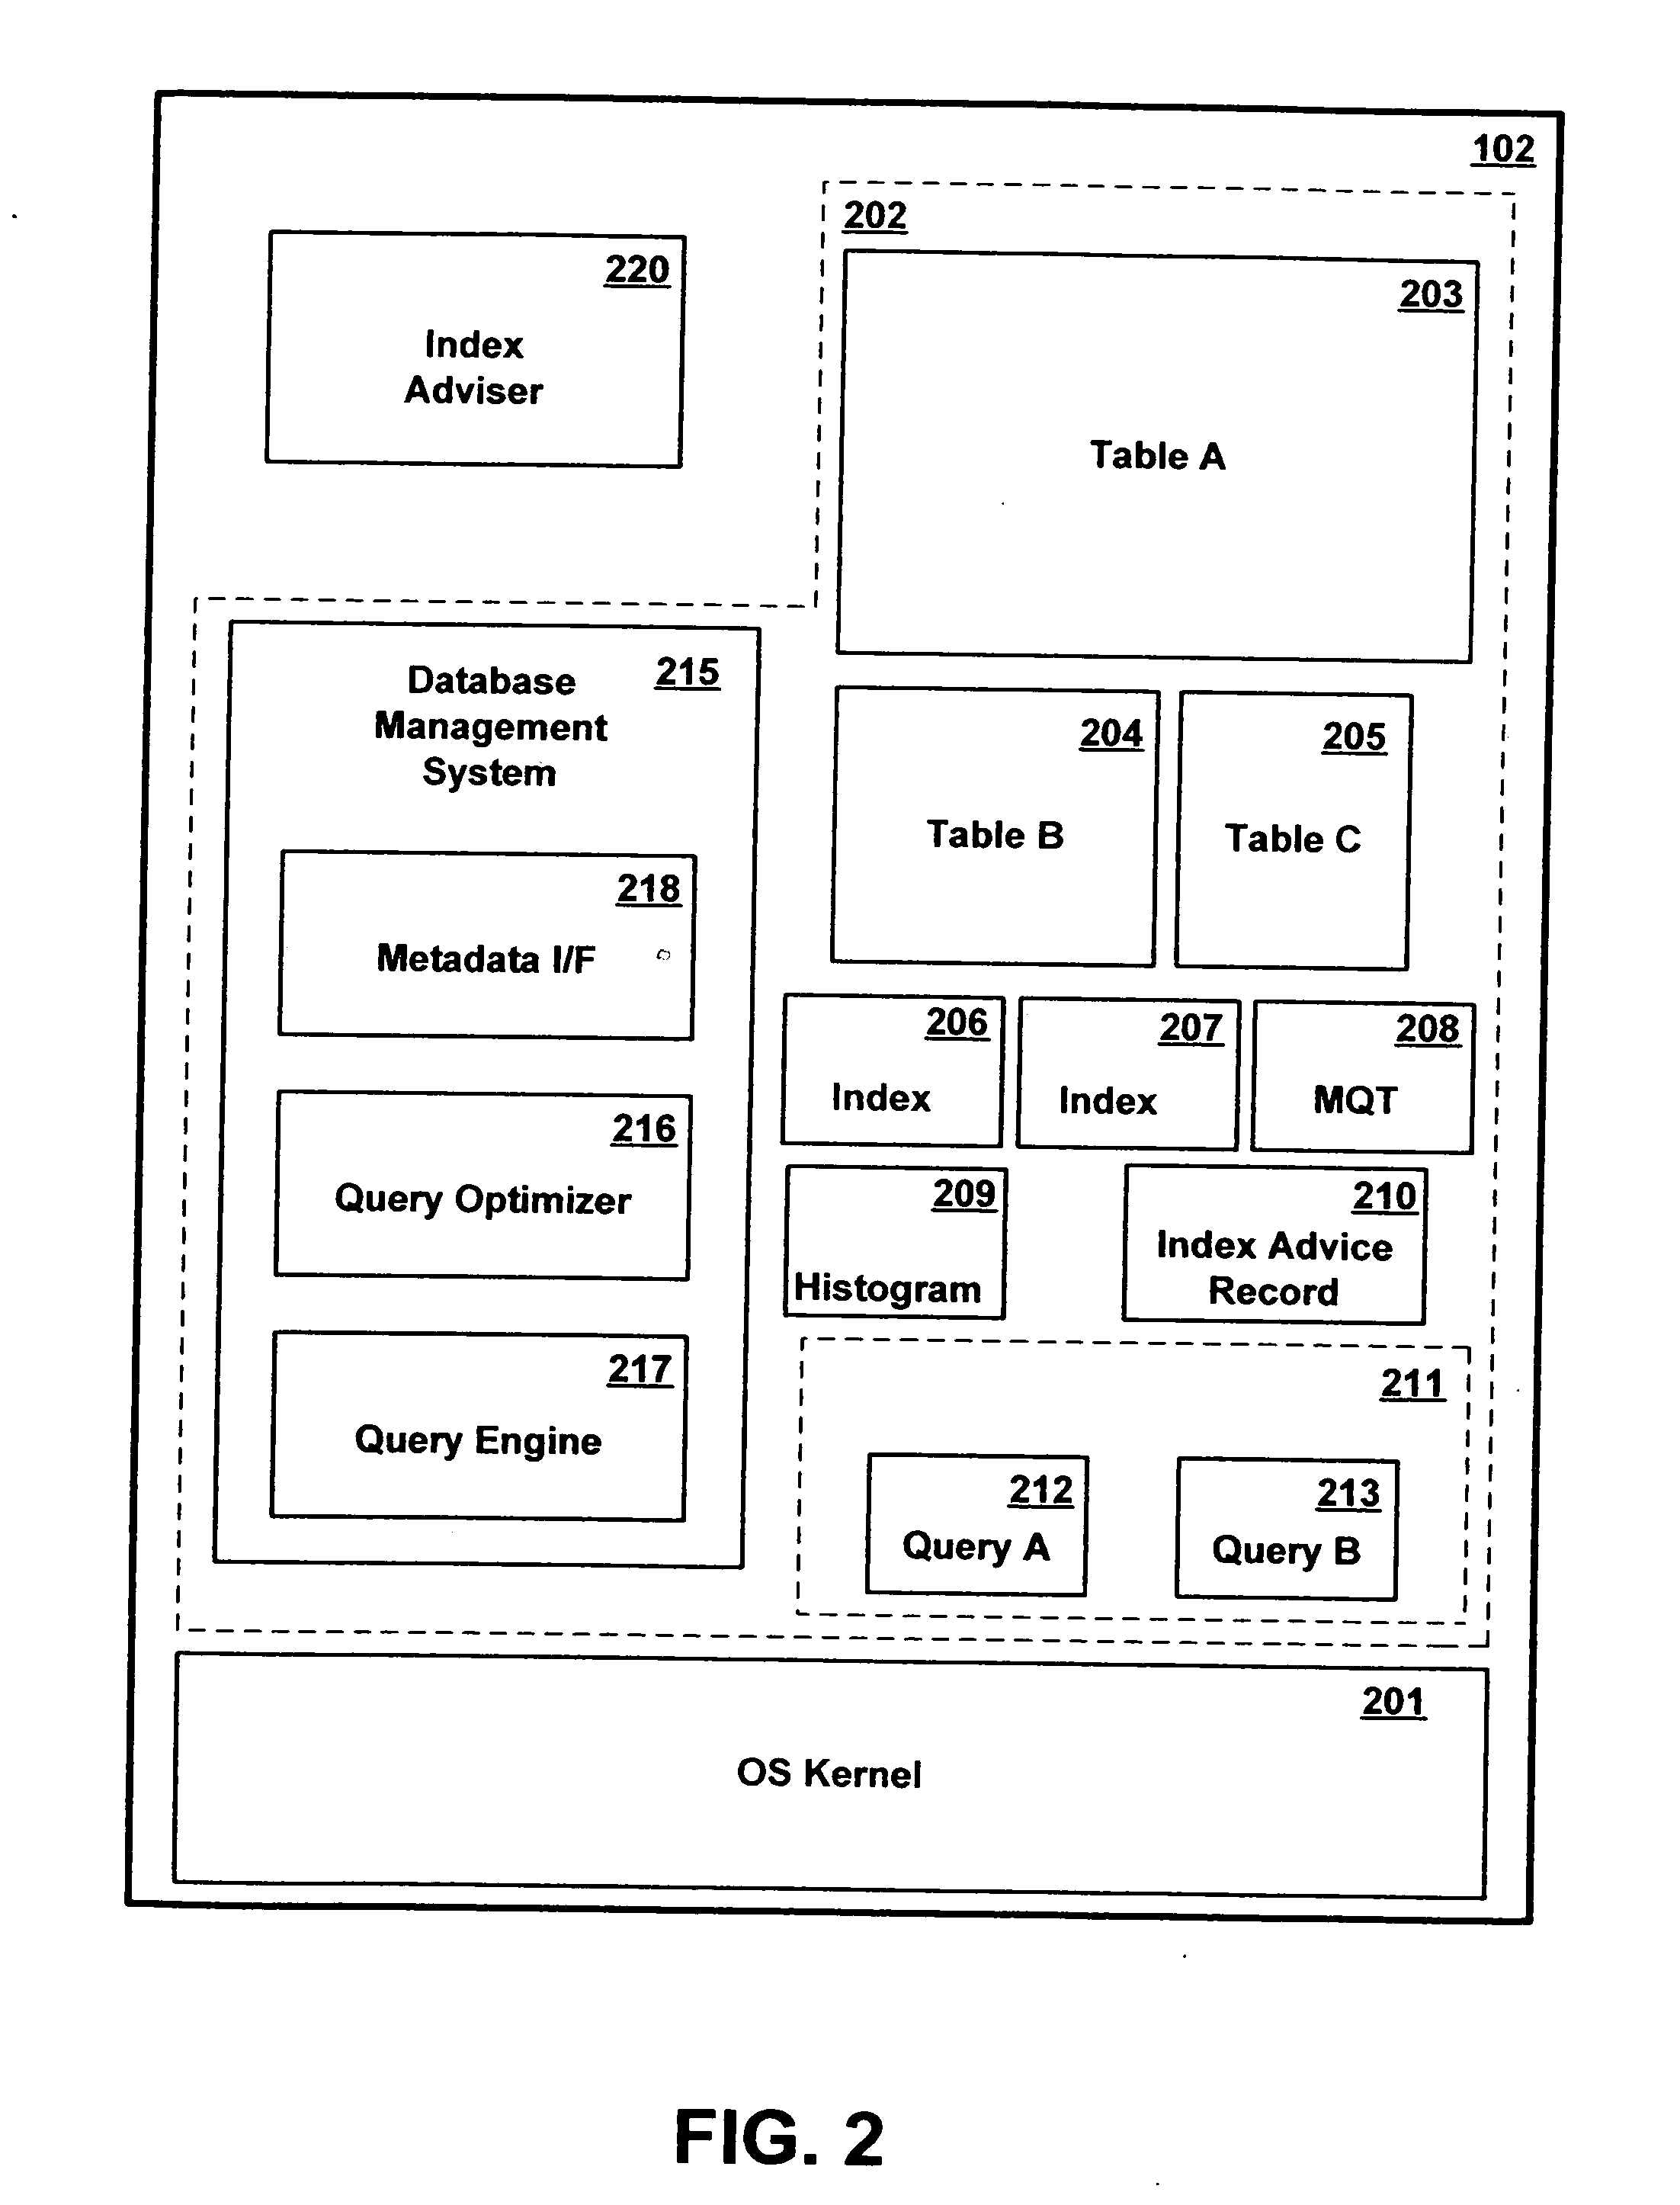 Method and apparatus for projecting the effect of maintaining an auxiliary database structure for use in executing database queries